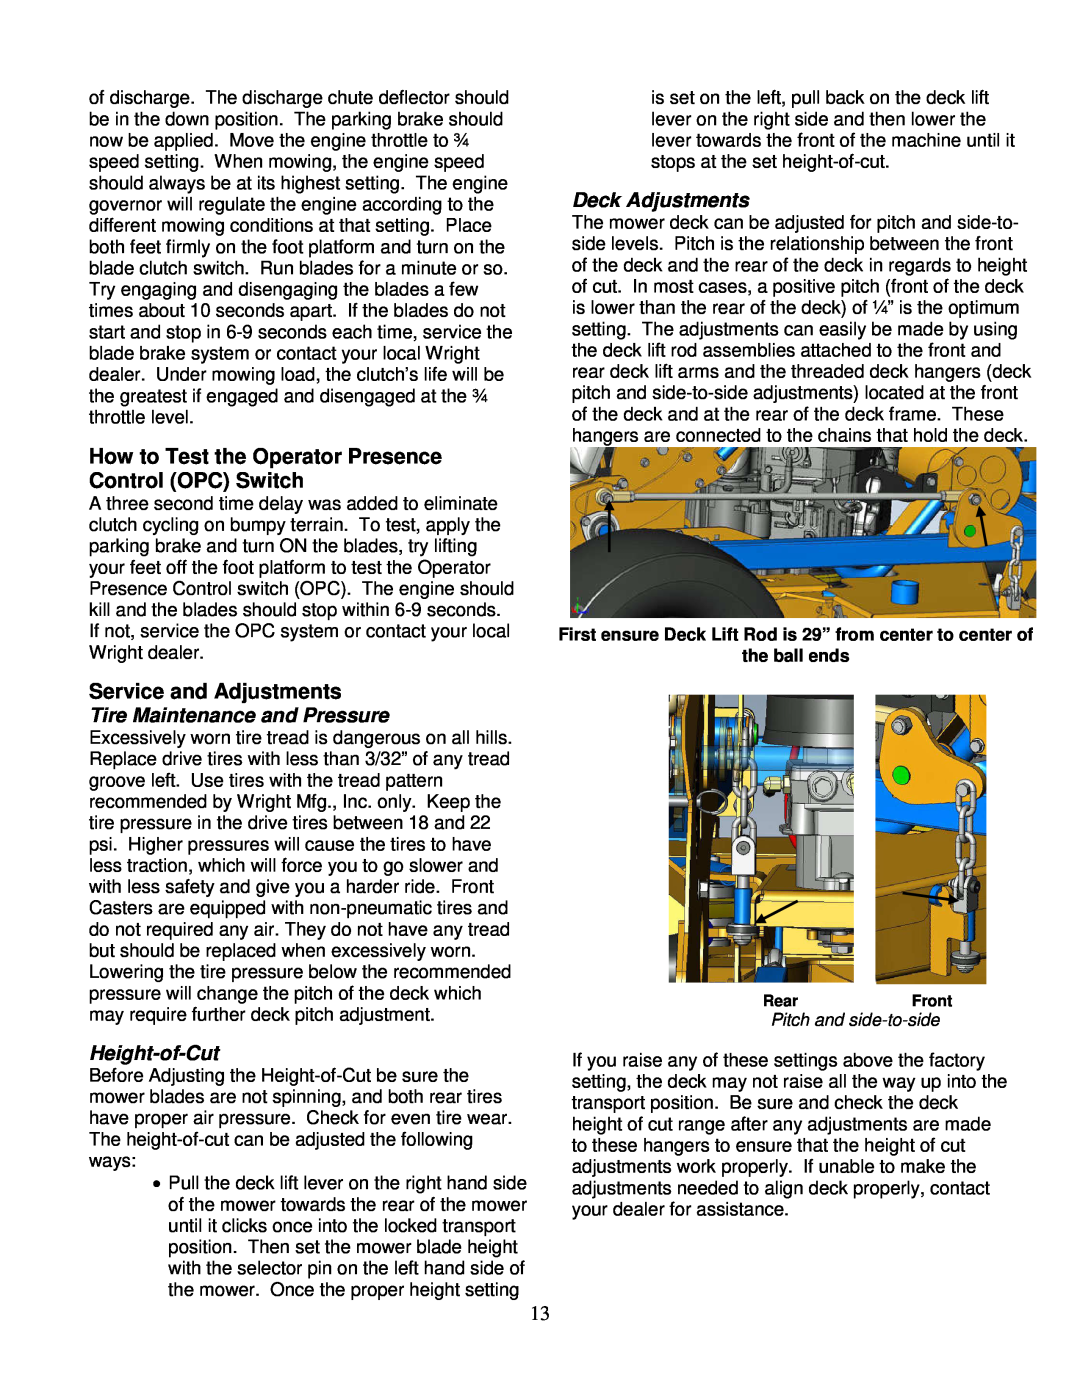 Wright Manufacturing 14SH654 How to Test the Operator Presence Control OPC Switch, Service and Adjustments, Height-of-Cut 